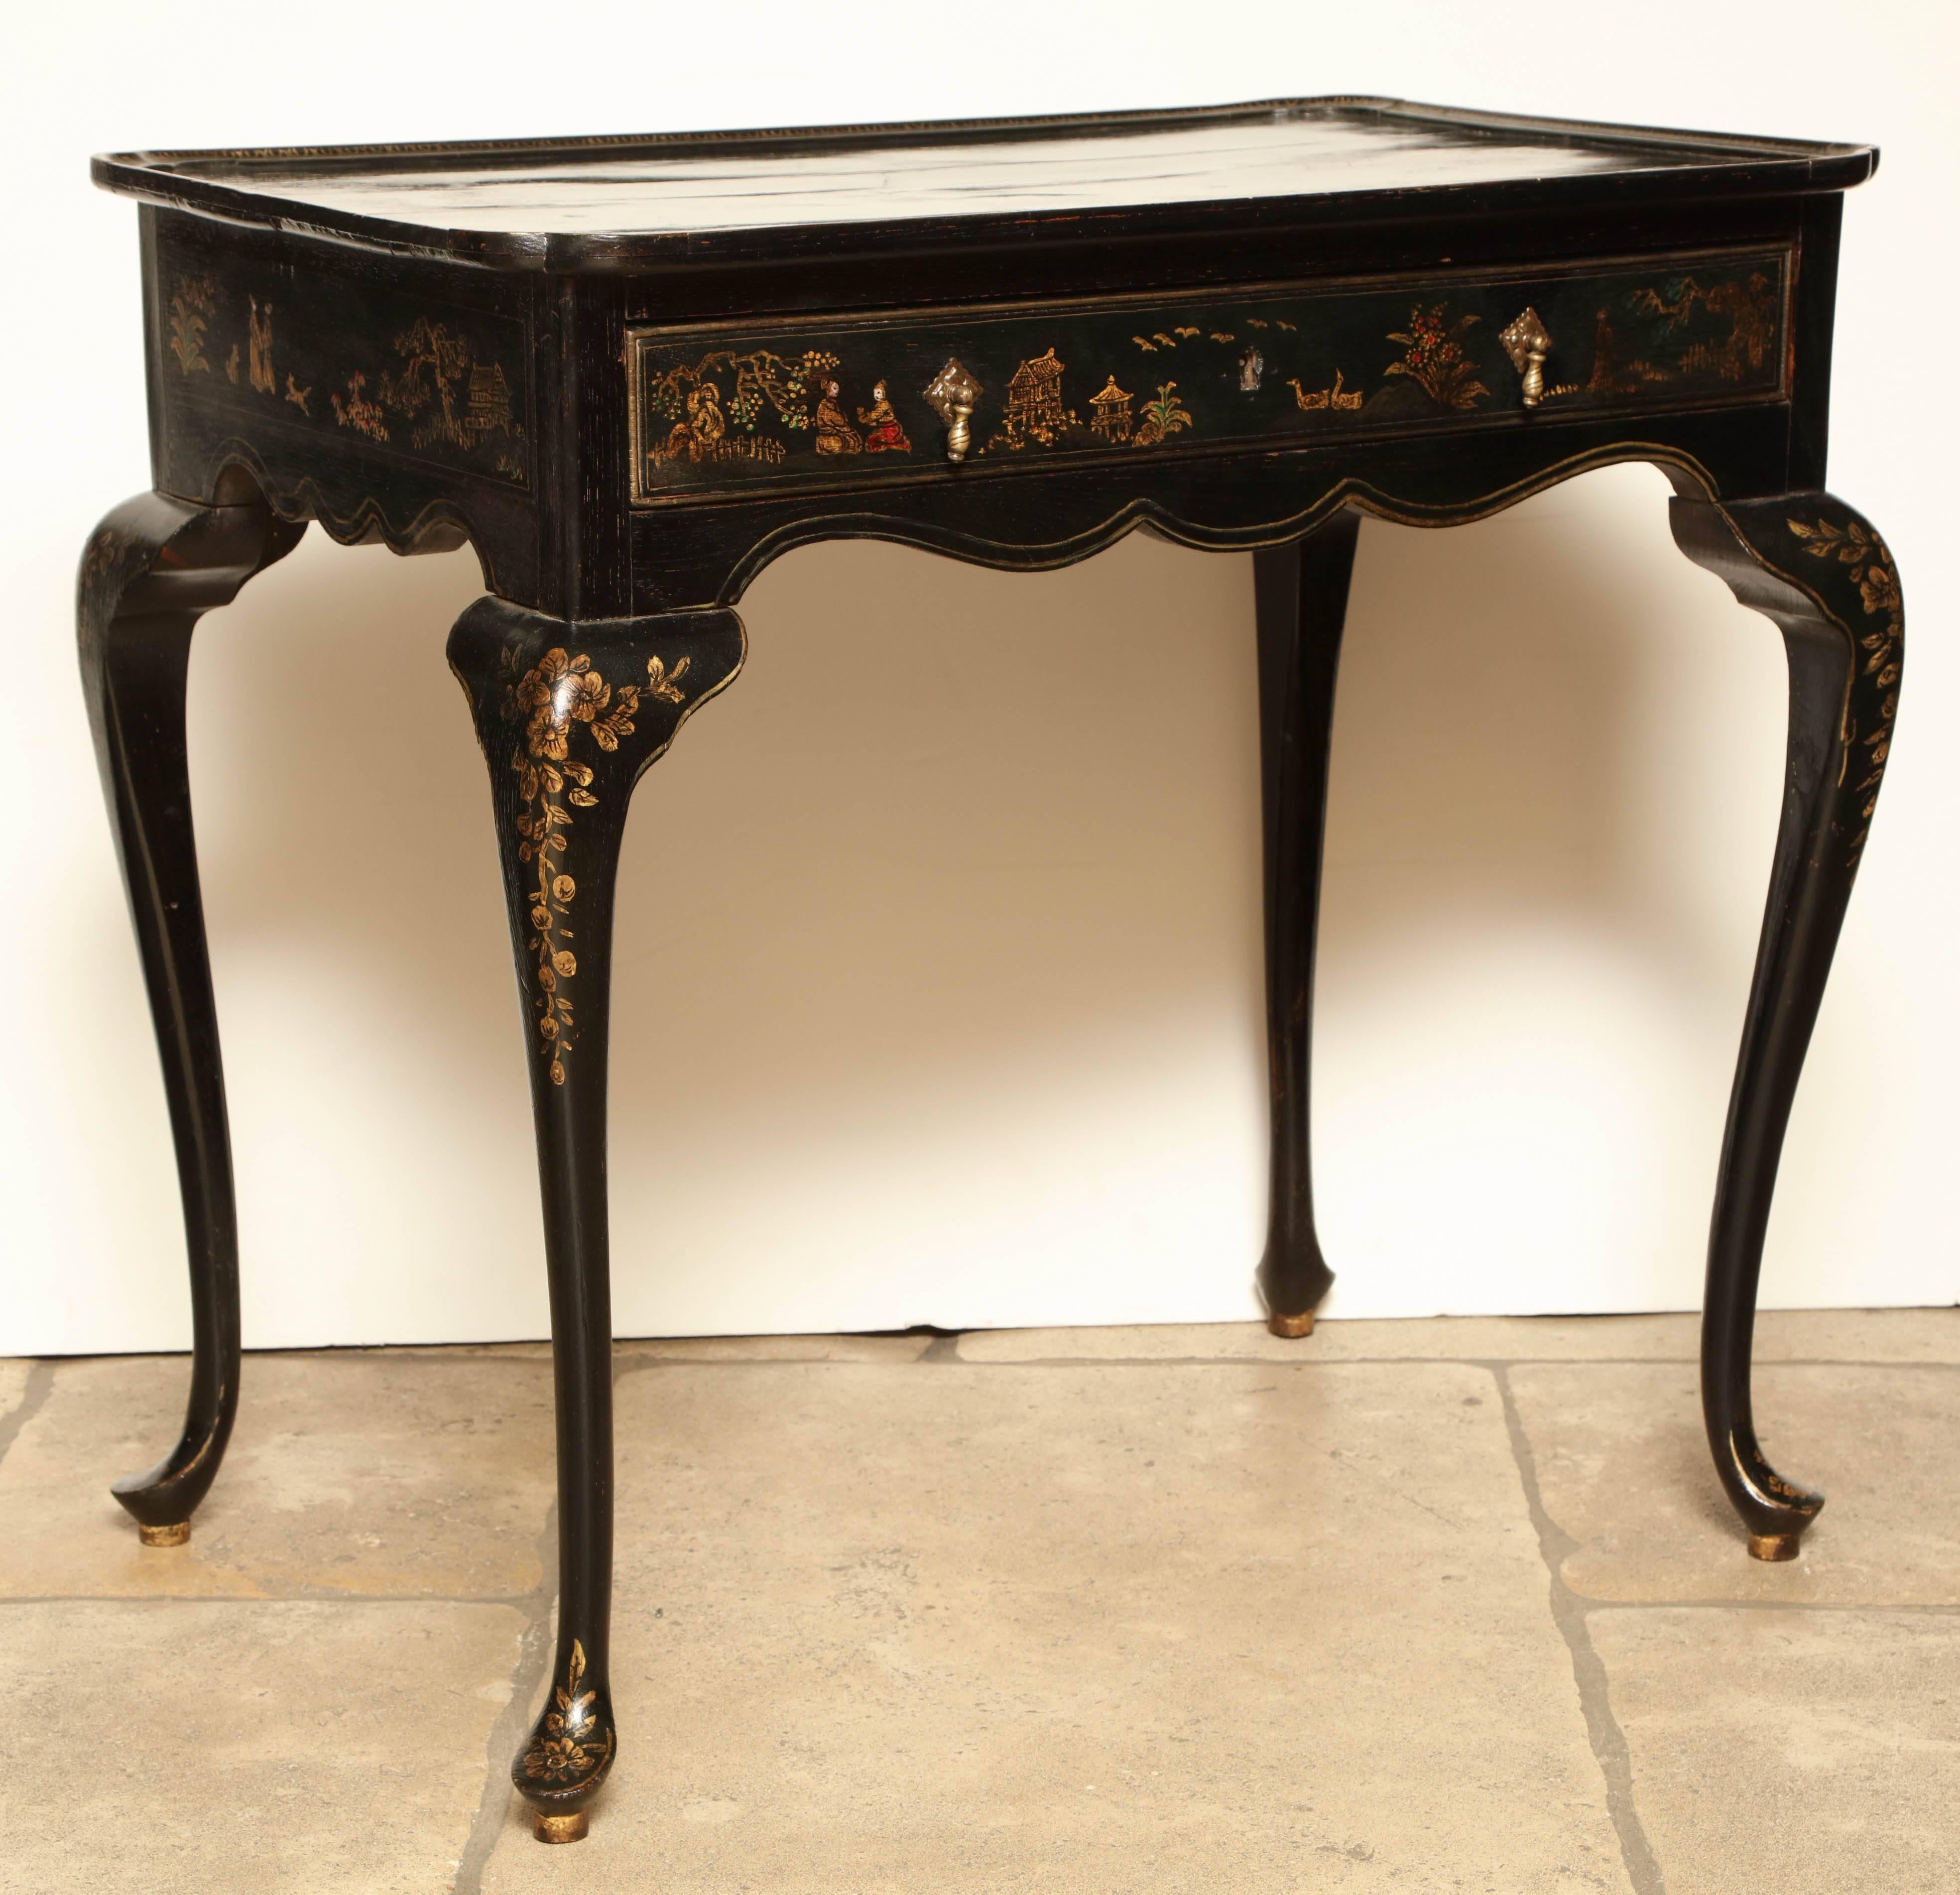 Queen Anne black lacquered chinoiserie decorated tea table with single frieze drawer on cabriole legs.